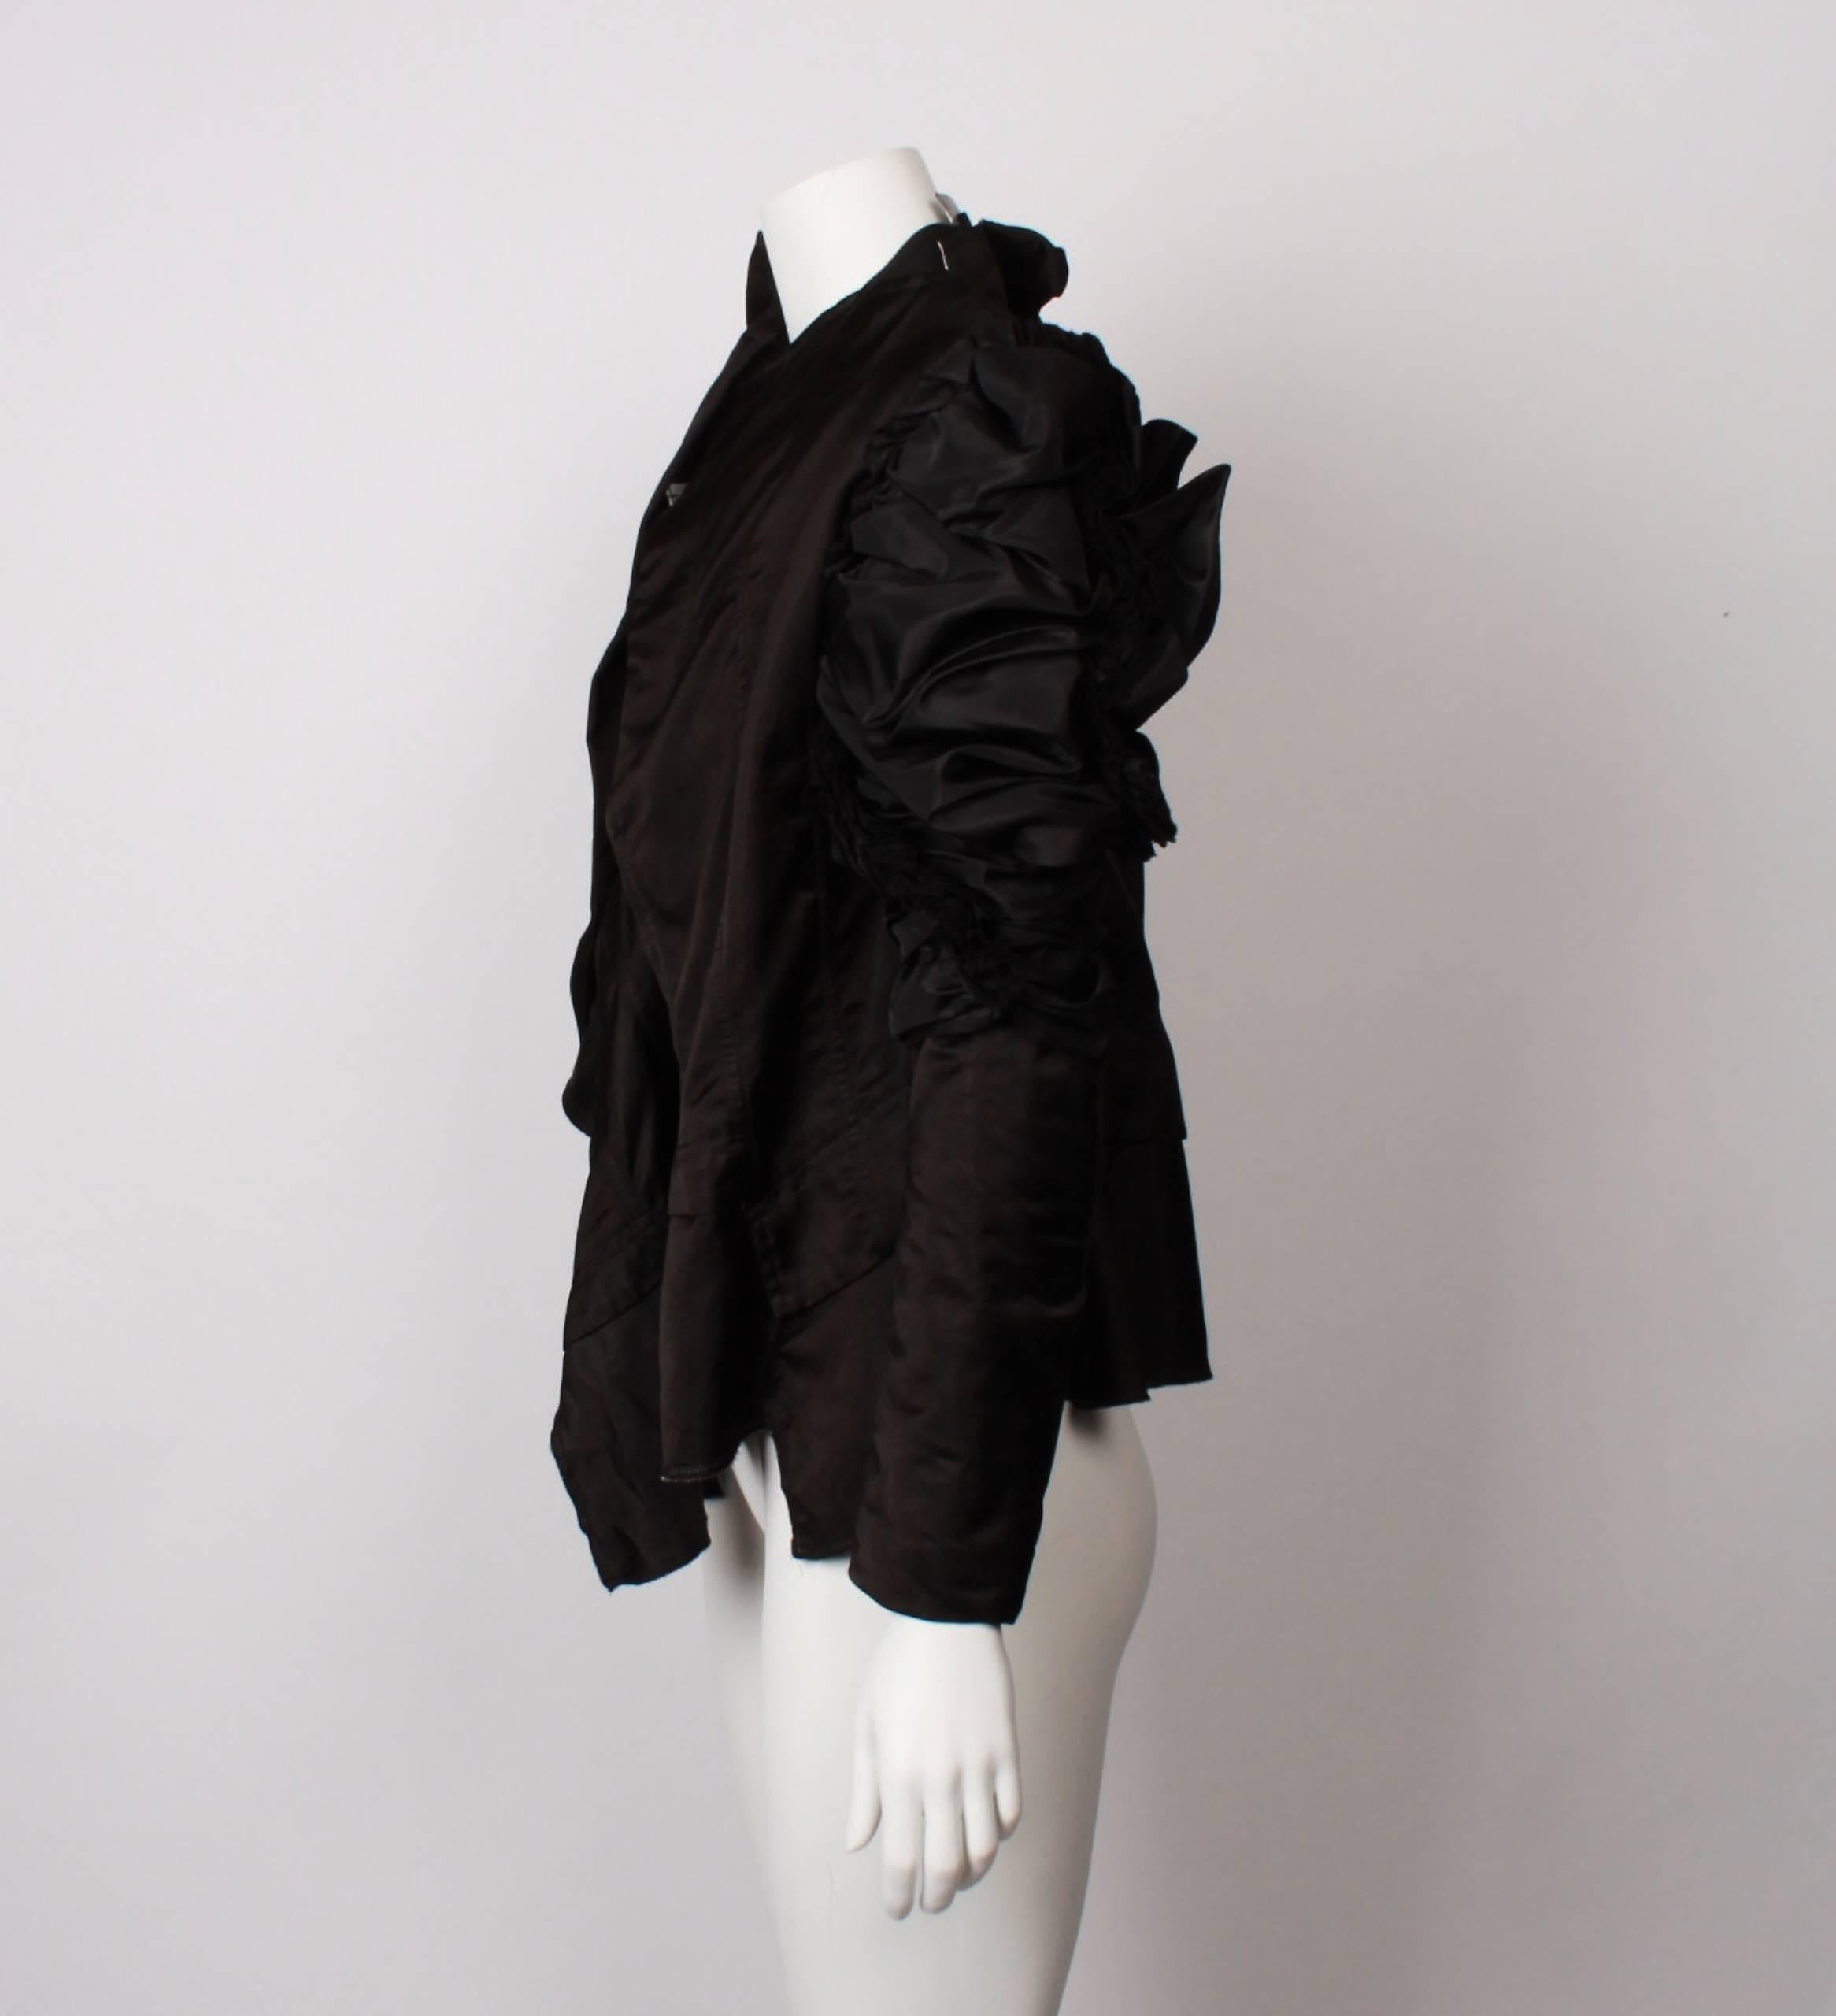 COMME DES GARCONS ruffled and gathered Asymmetric Top in black satin. 
Super gathered sleeves, with padding, asymmetric peplum and hook and eye closure. Half lined. 
From the 2004 collection.